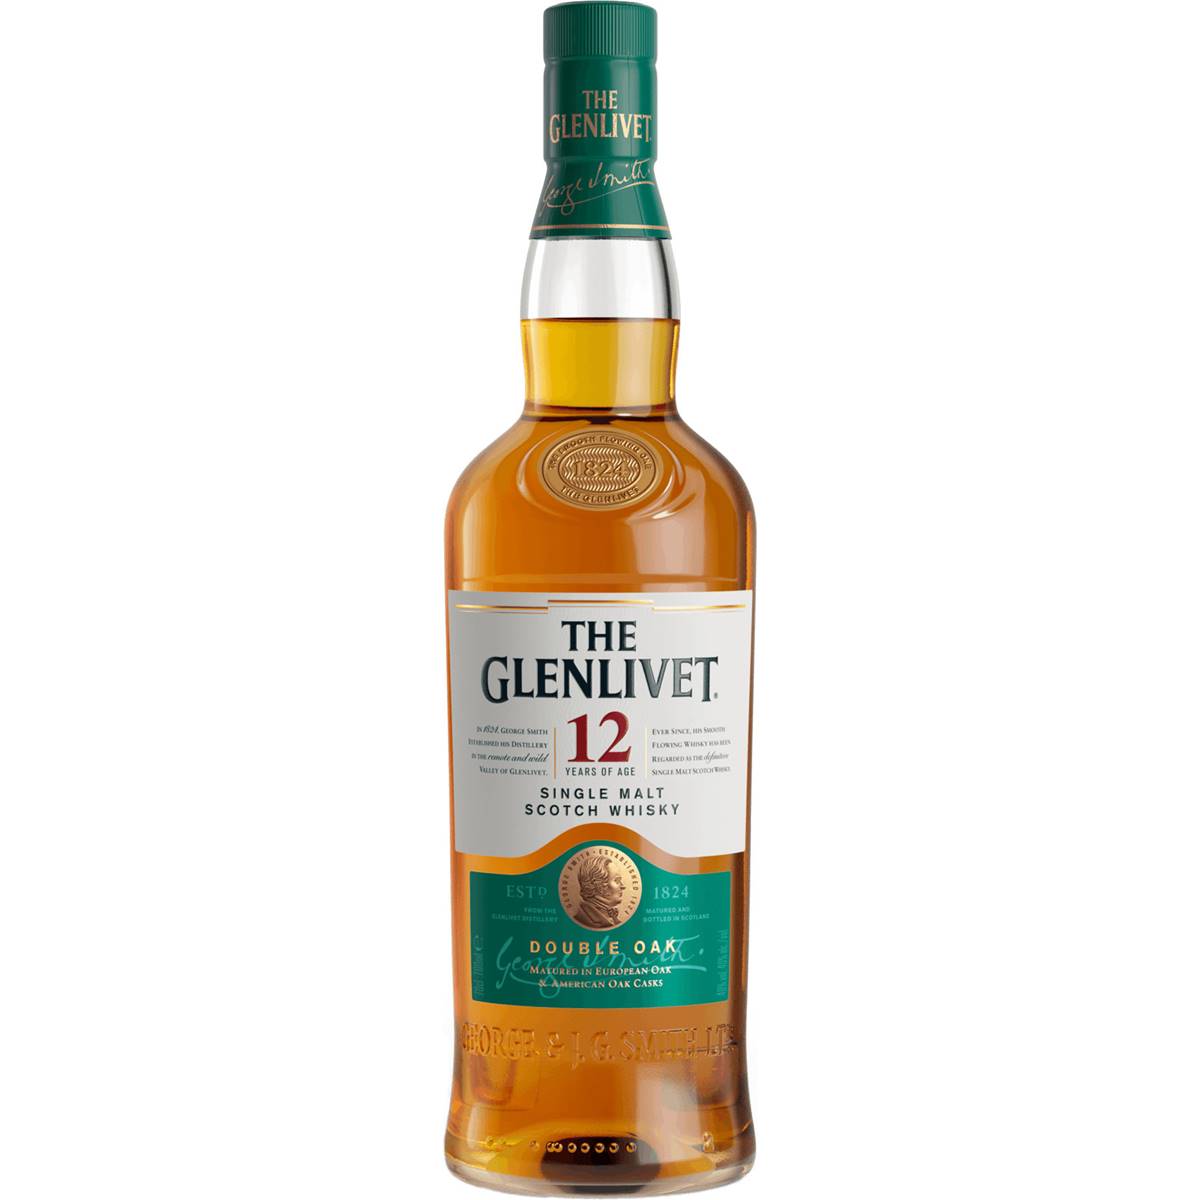 Calories in The Glenlivet Scotch 12 Year Old 12 Year Old